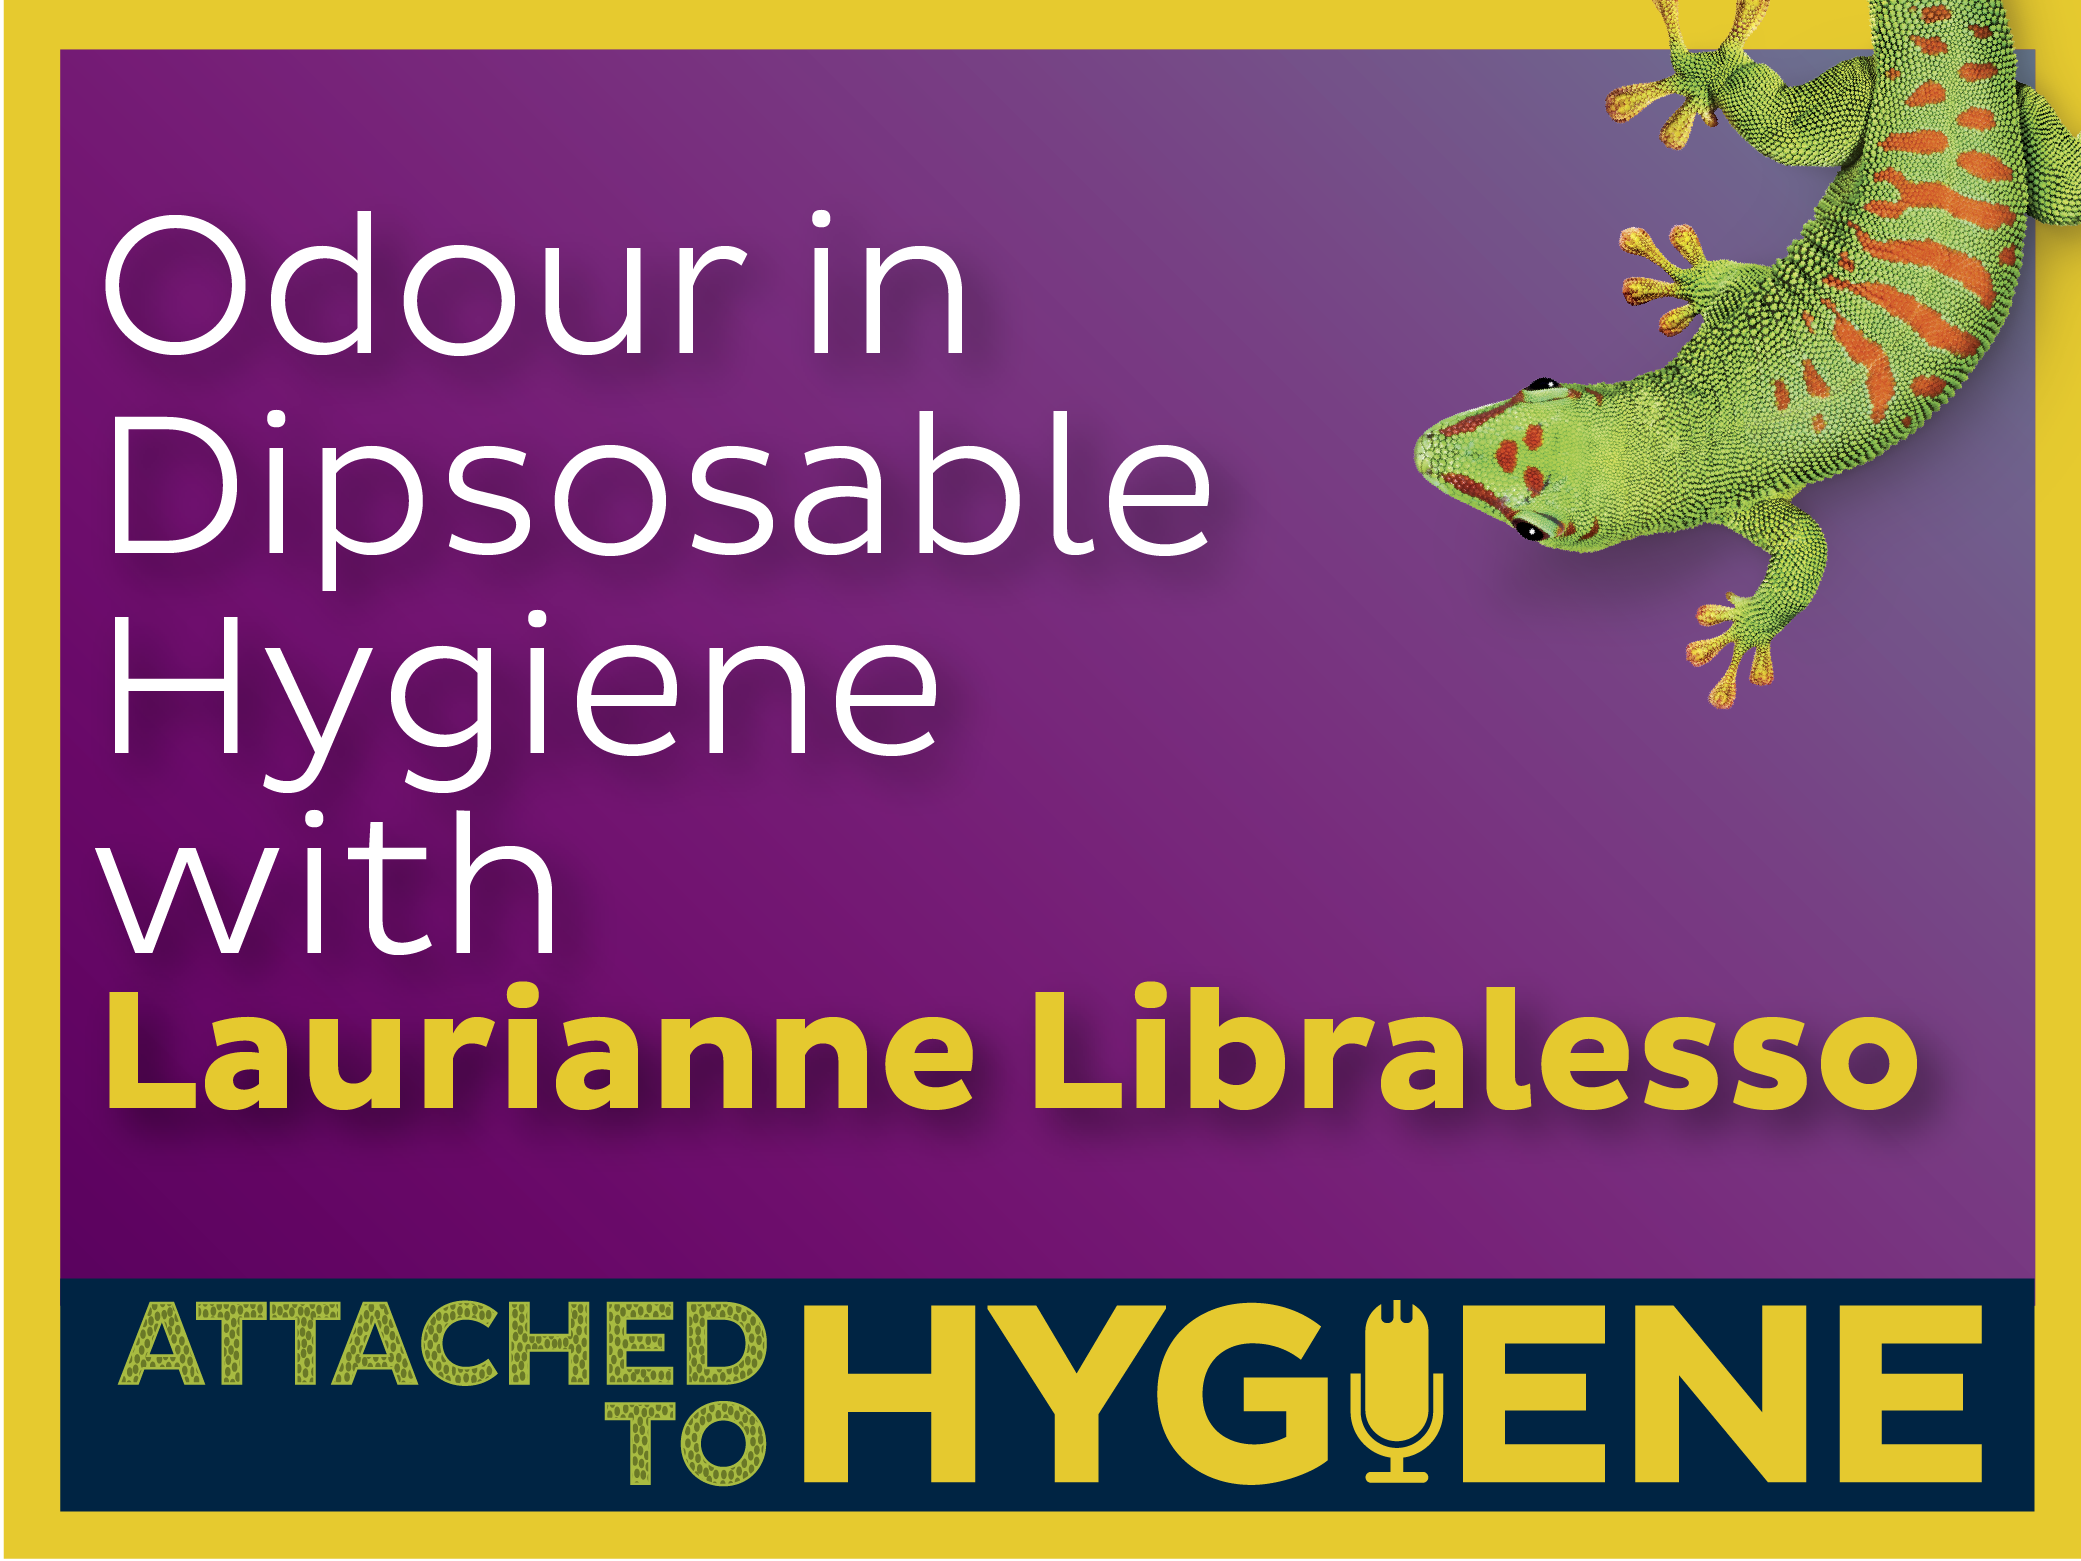 Odour-in-Disposable-Hygiene-with-Laurianne-Libralesso